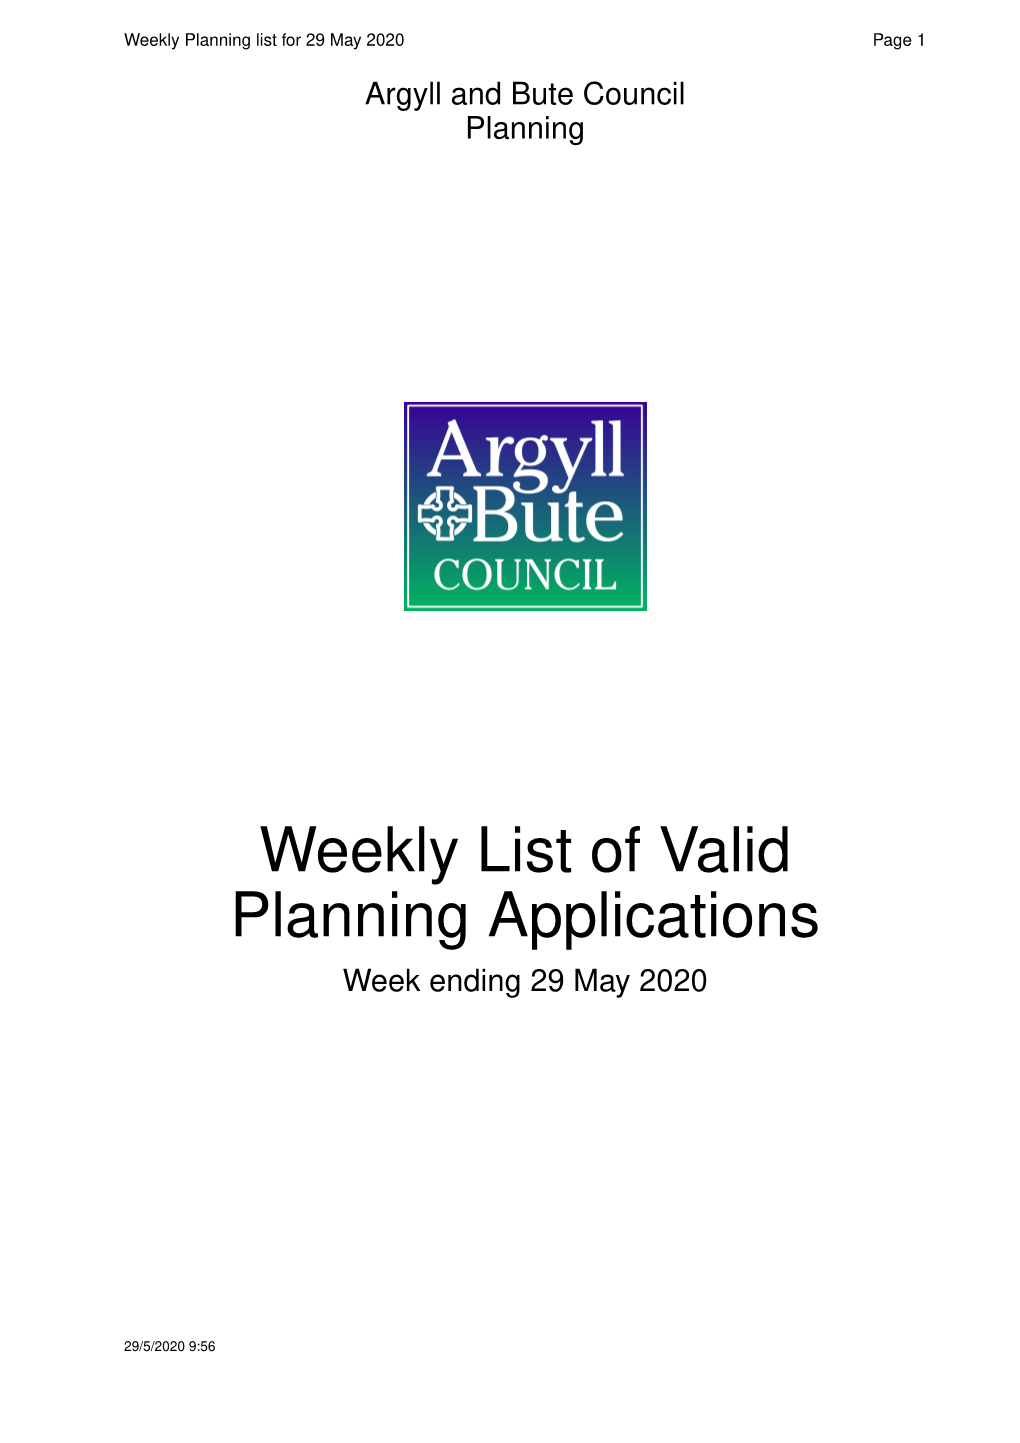 Weekly List of Valid Planning Applications 29Th May 2020.Pdf